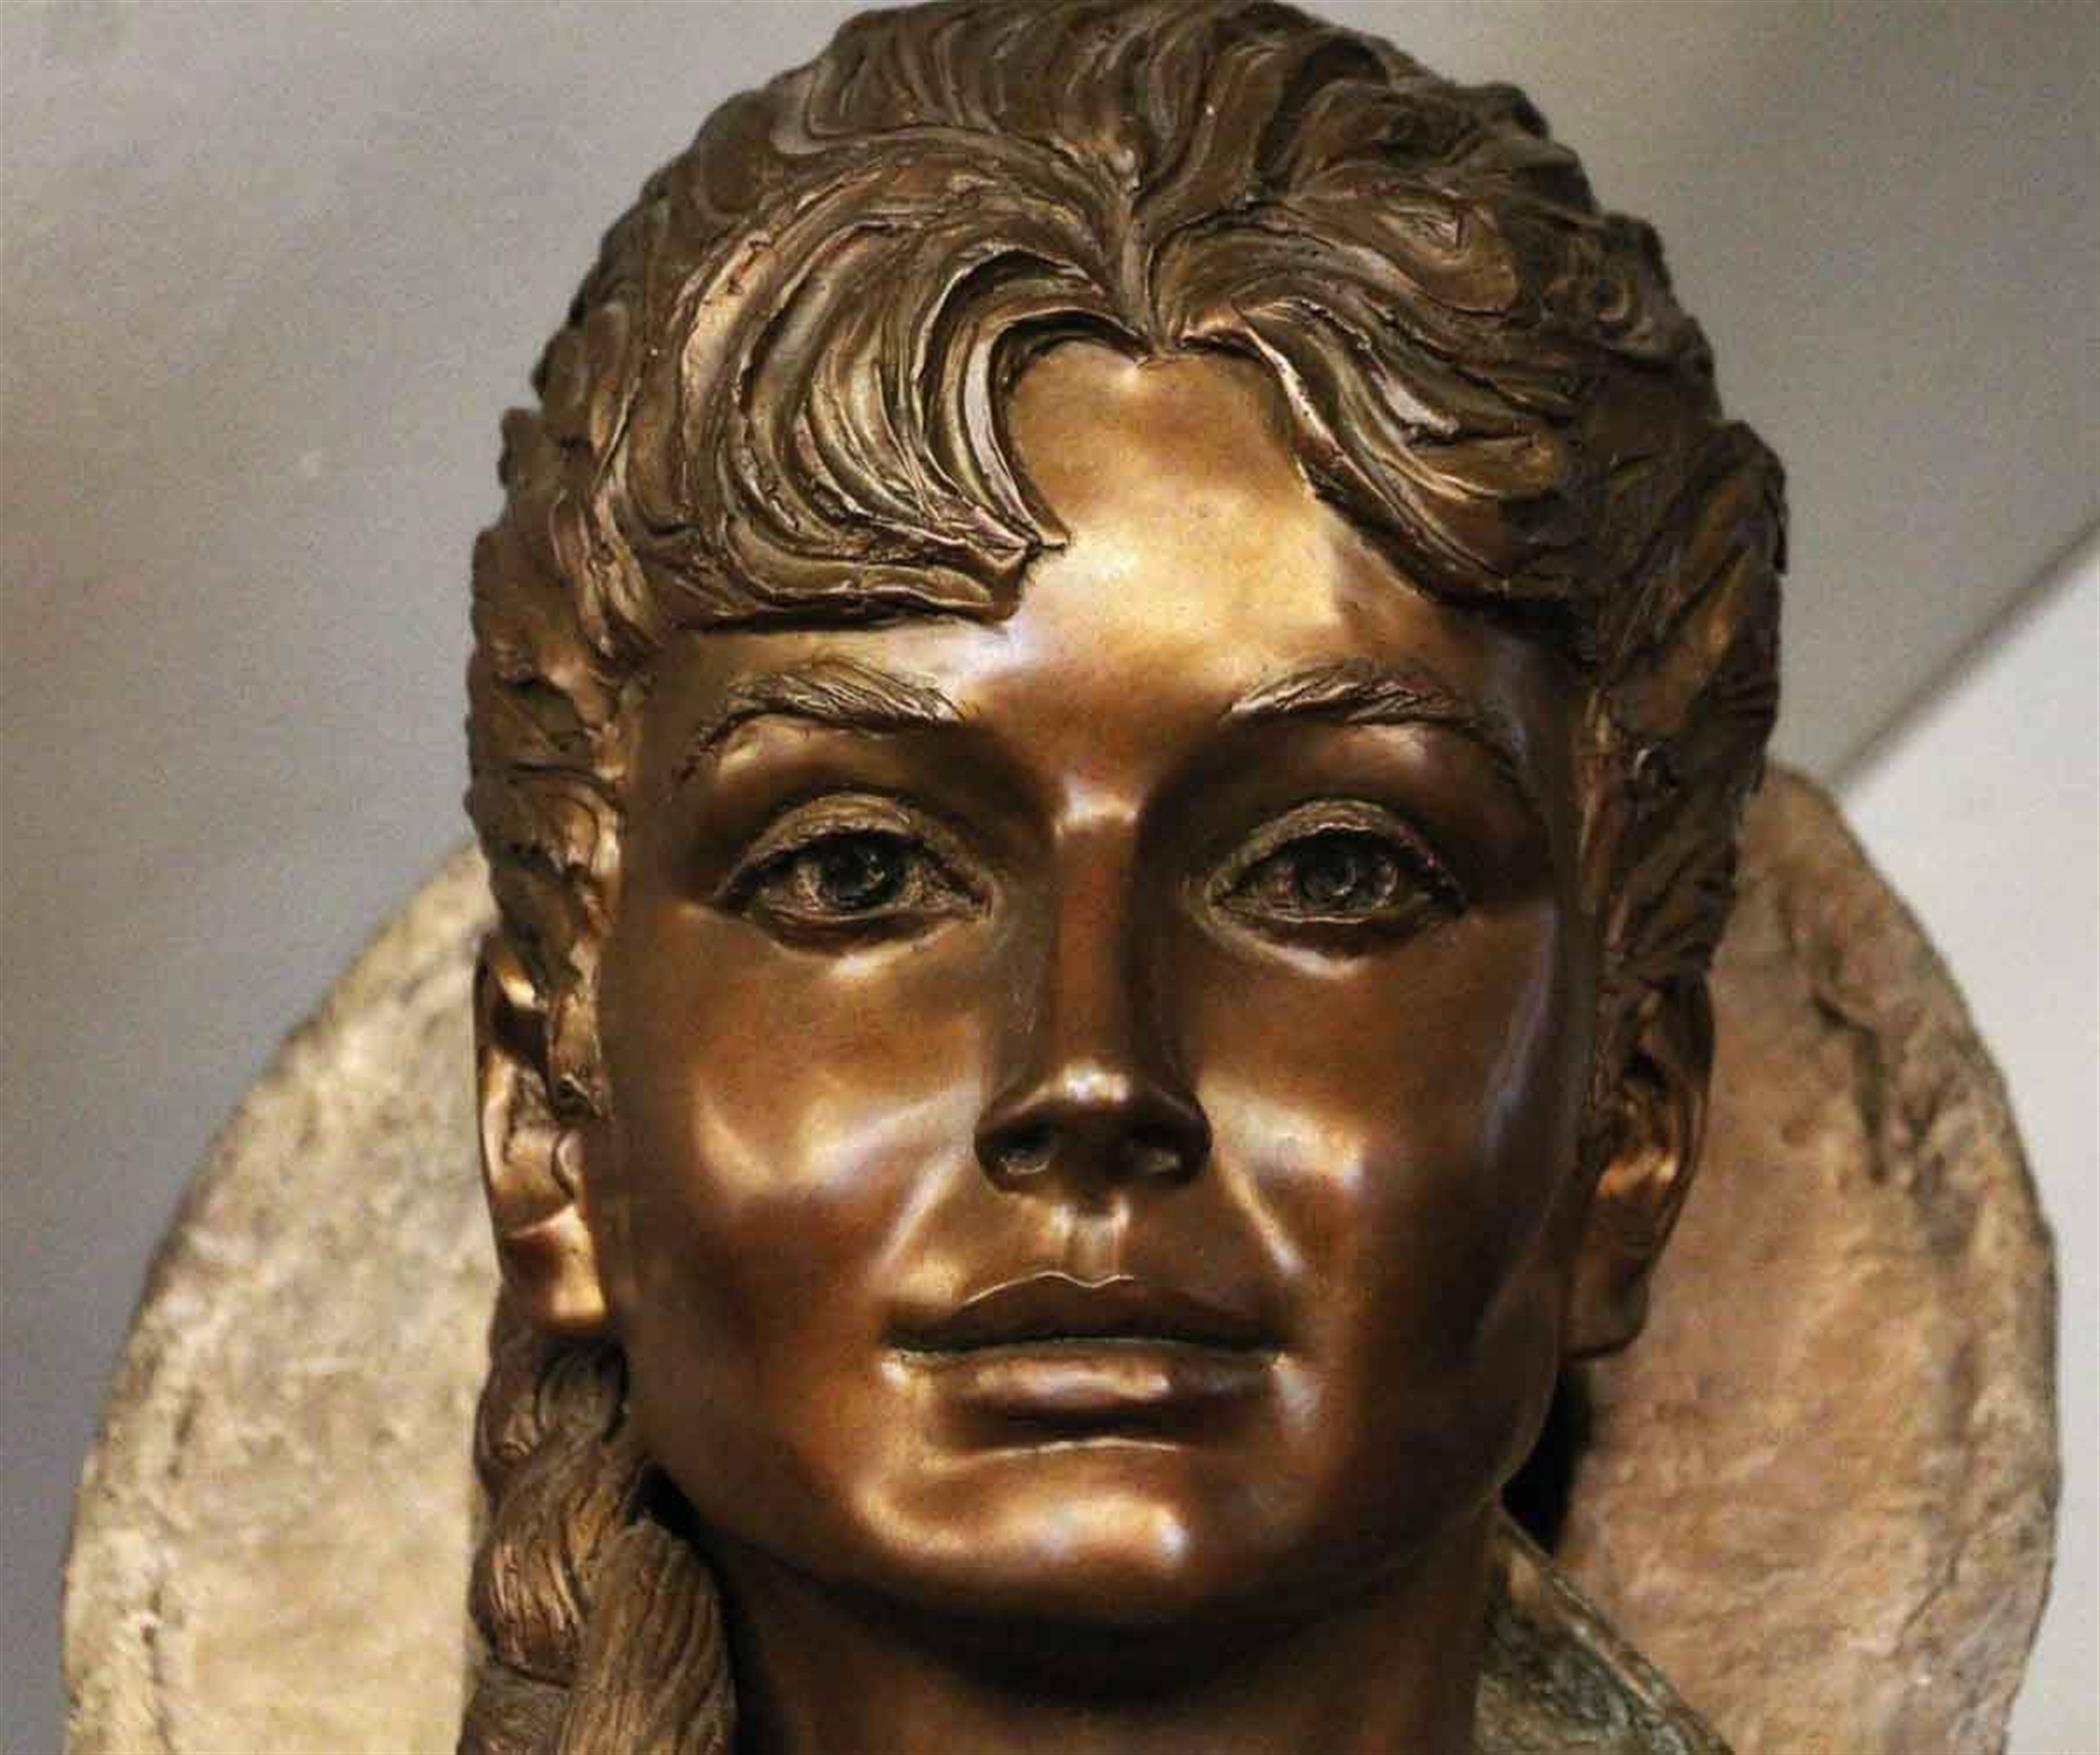 Contemporary bronze sculpture on a white marble base. Sun Dance won the A.A.P.L. Grand National 1998 Sculpture George Gach Memorial Award. Signed by artist Peggy Mach. Numbered 1/25. This can be seen at our 2420 Broadway location on the upper west